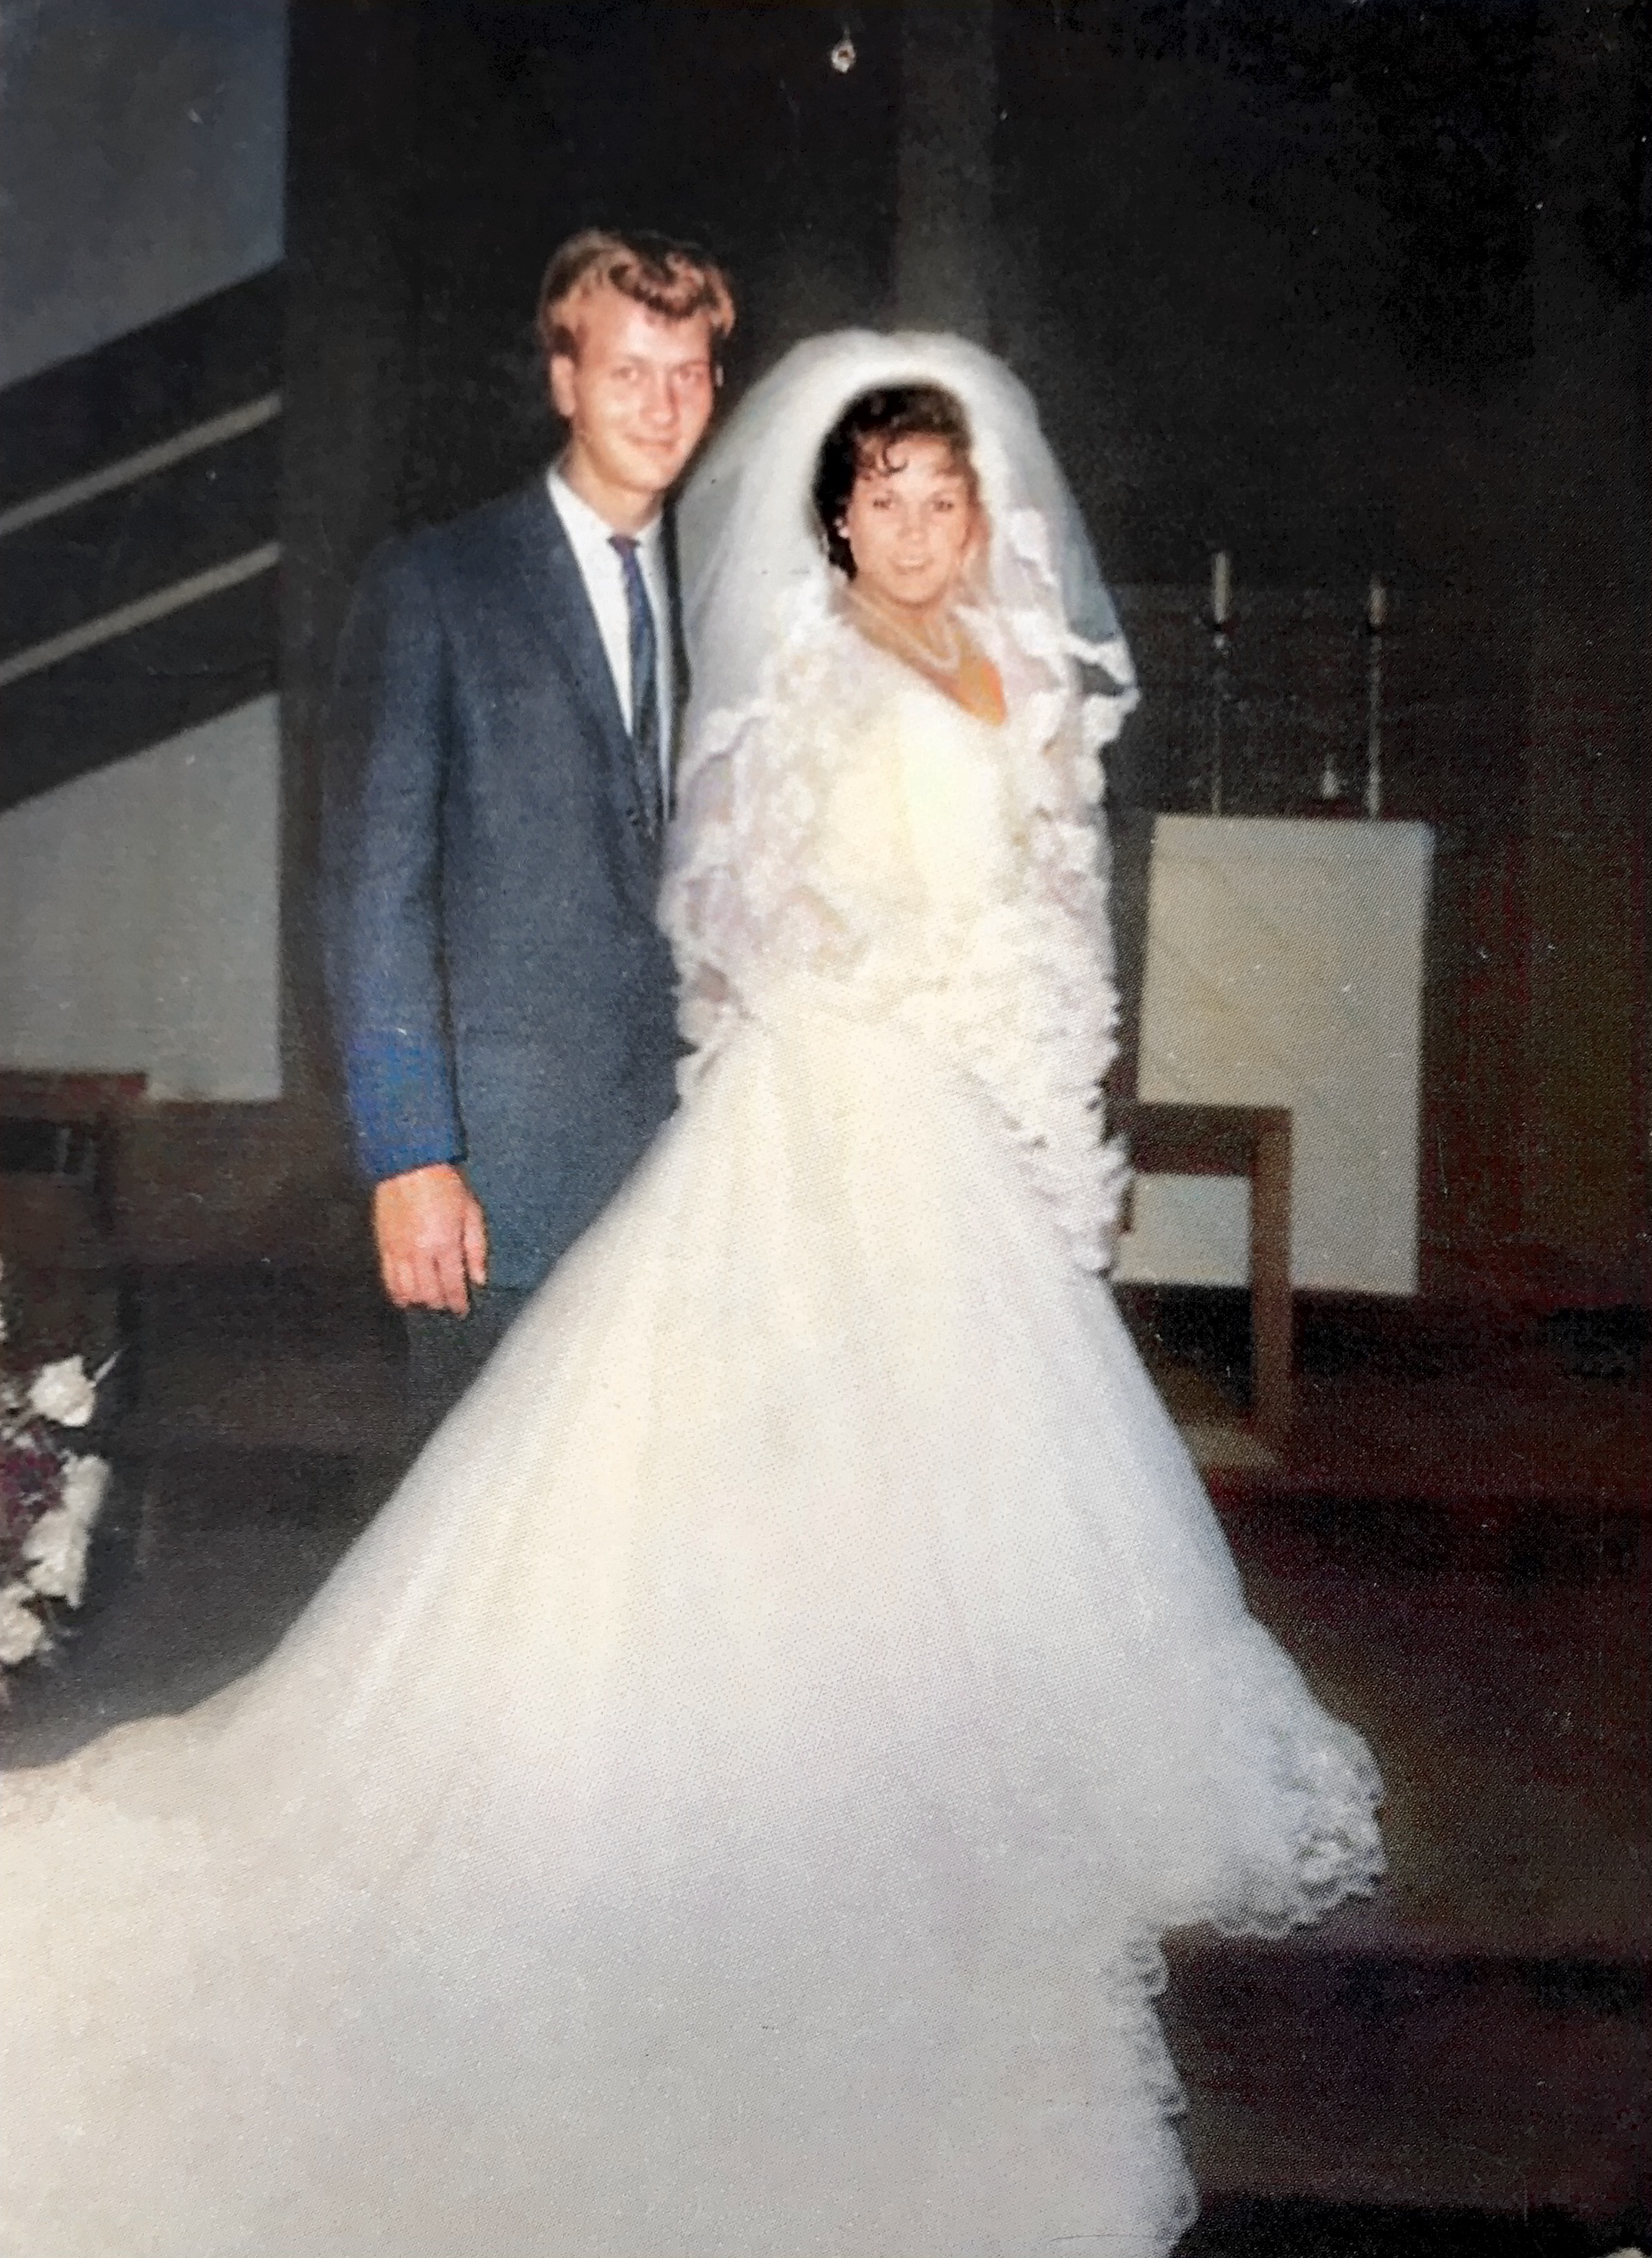 This was taken on our wedding day in Stockton  california October 1959,  